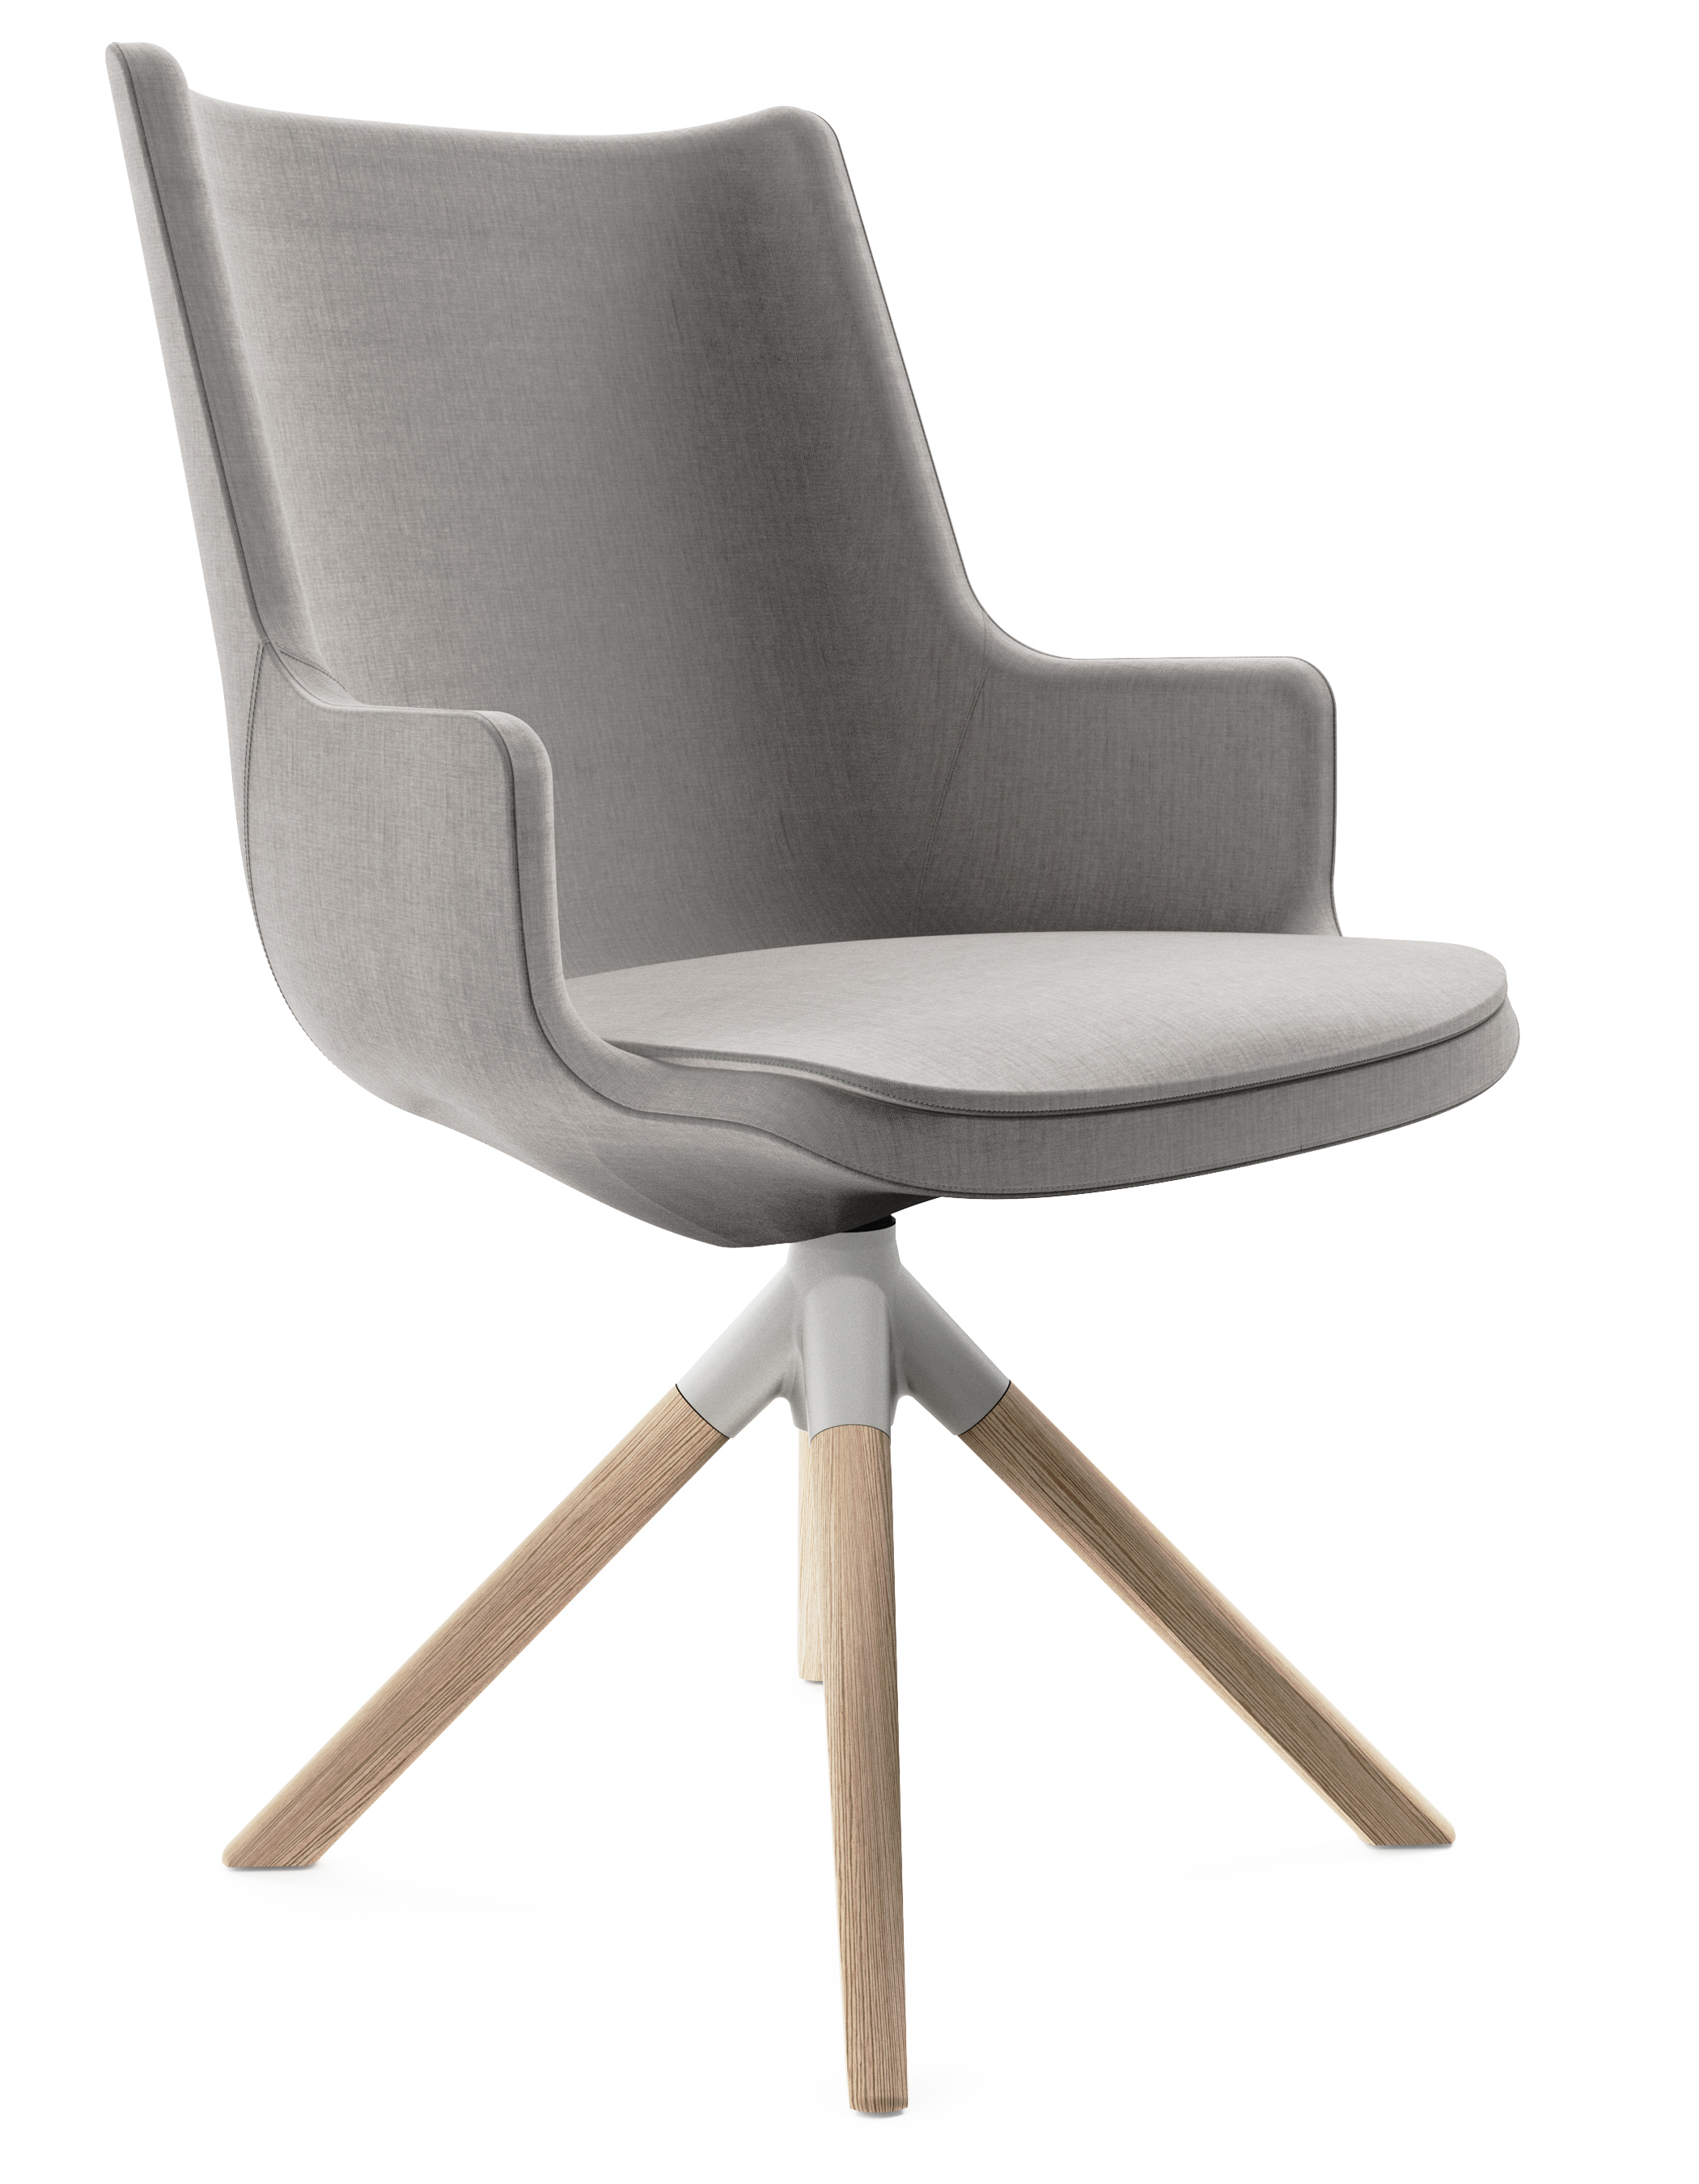 WS - Contour chair - Mid, 4-star timber base (Front angle)